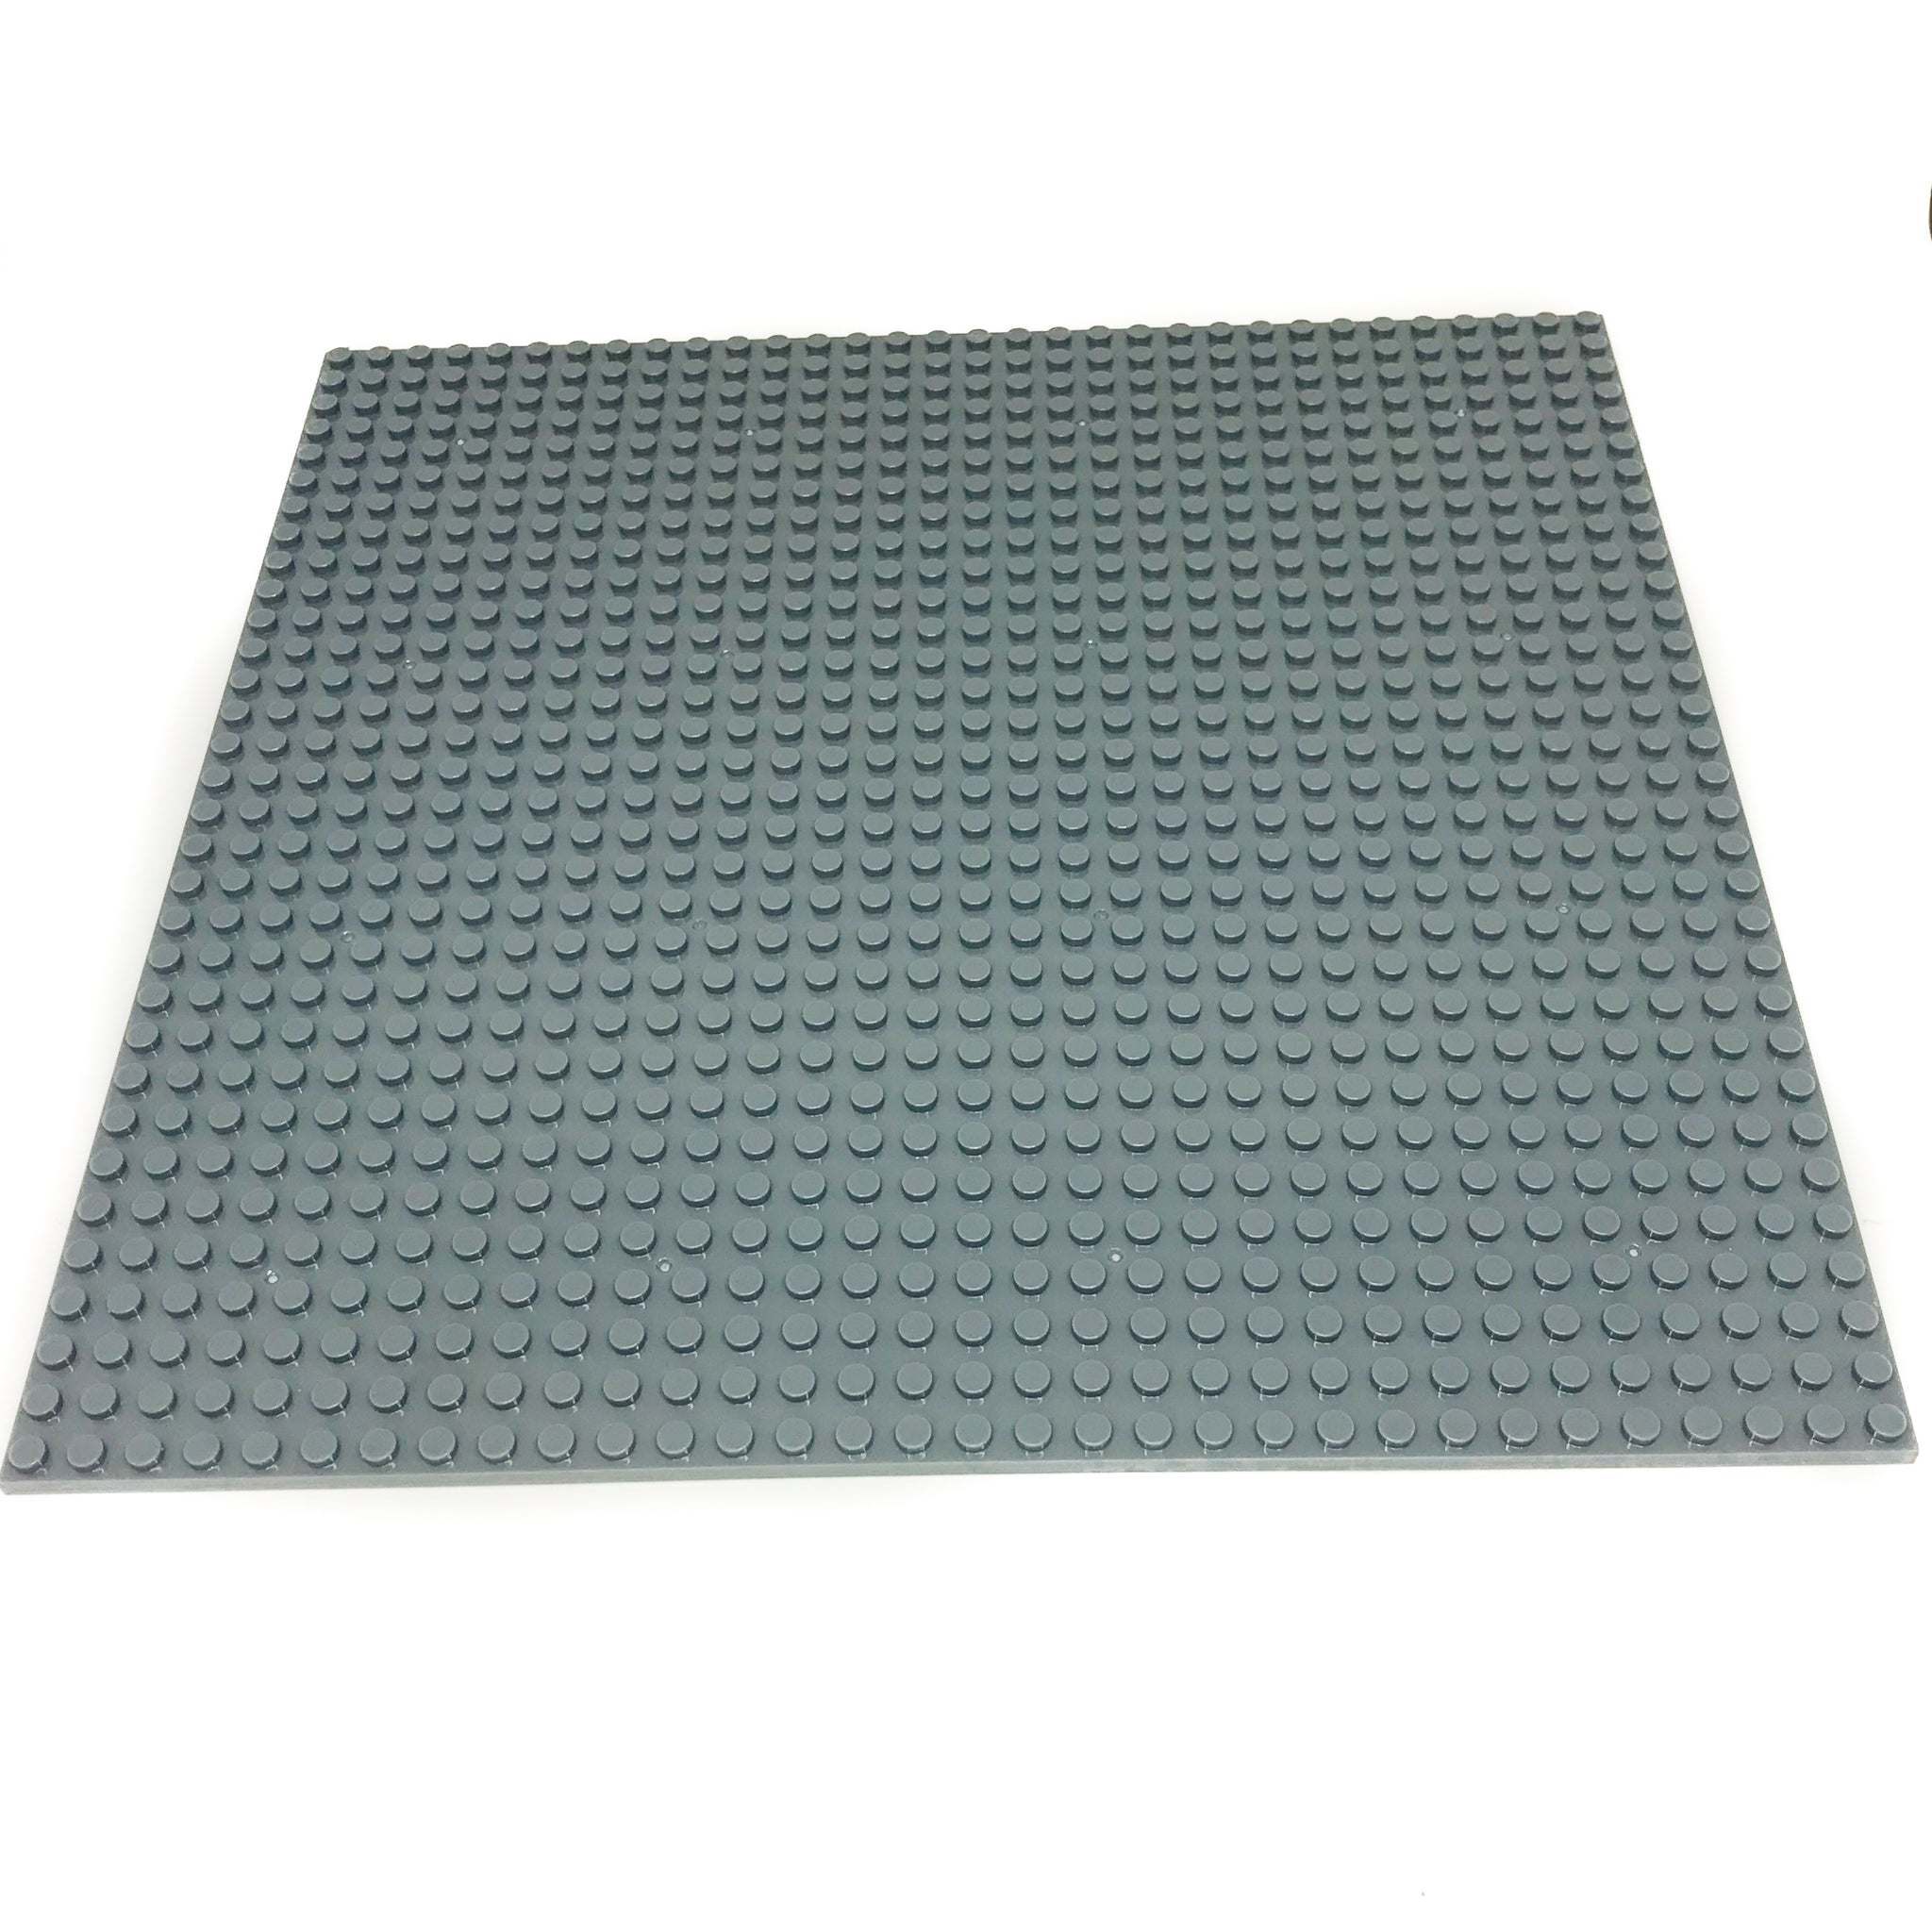 Large Lego Compatible Base Plate Construction Blocks Baseplate 32x32 S